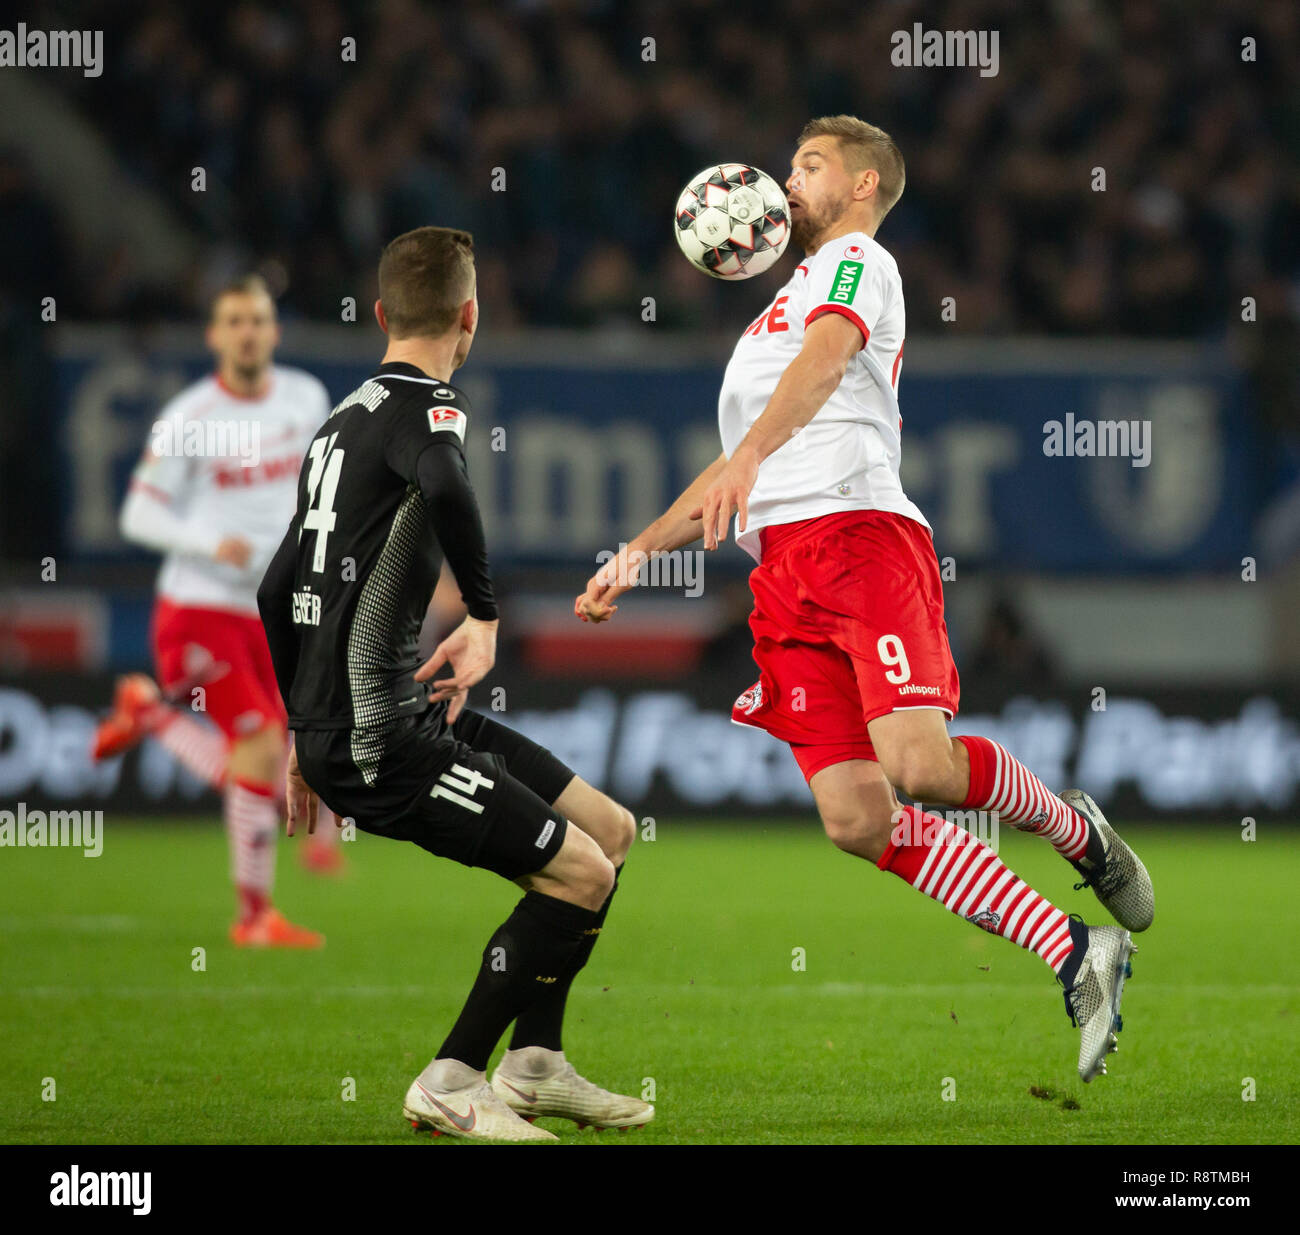 Cologne, Germany 17th December 2018, 2nd League, 1. FC Koeln vs 1. FC Magdeburg: Steffen Schaefer (Magdeburg), Simon Terodde (Koeln) in competition.   DFL REGULATIONS PROHIBIT ANY USE OF PHOTOGRAPHS AS IMAGE SEQUENCES AND/OR QUASI-VIDEO             Credit: Juergen Schwarz/Alamy Live News Stock Photo